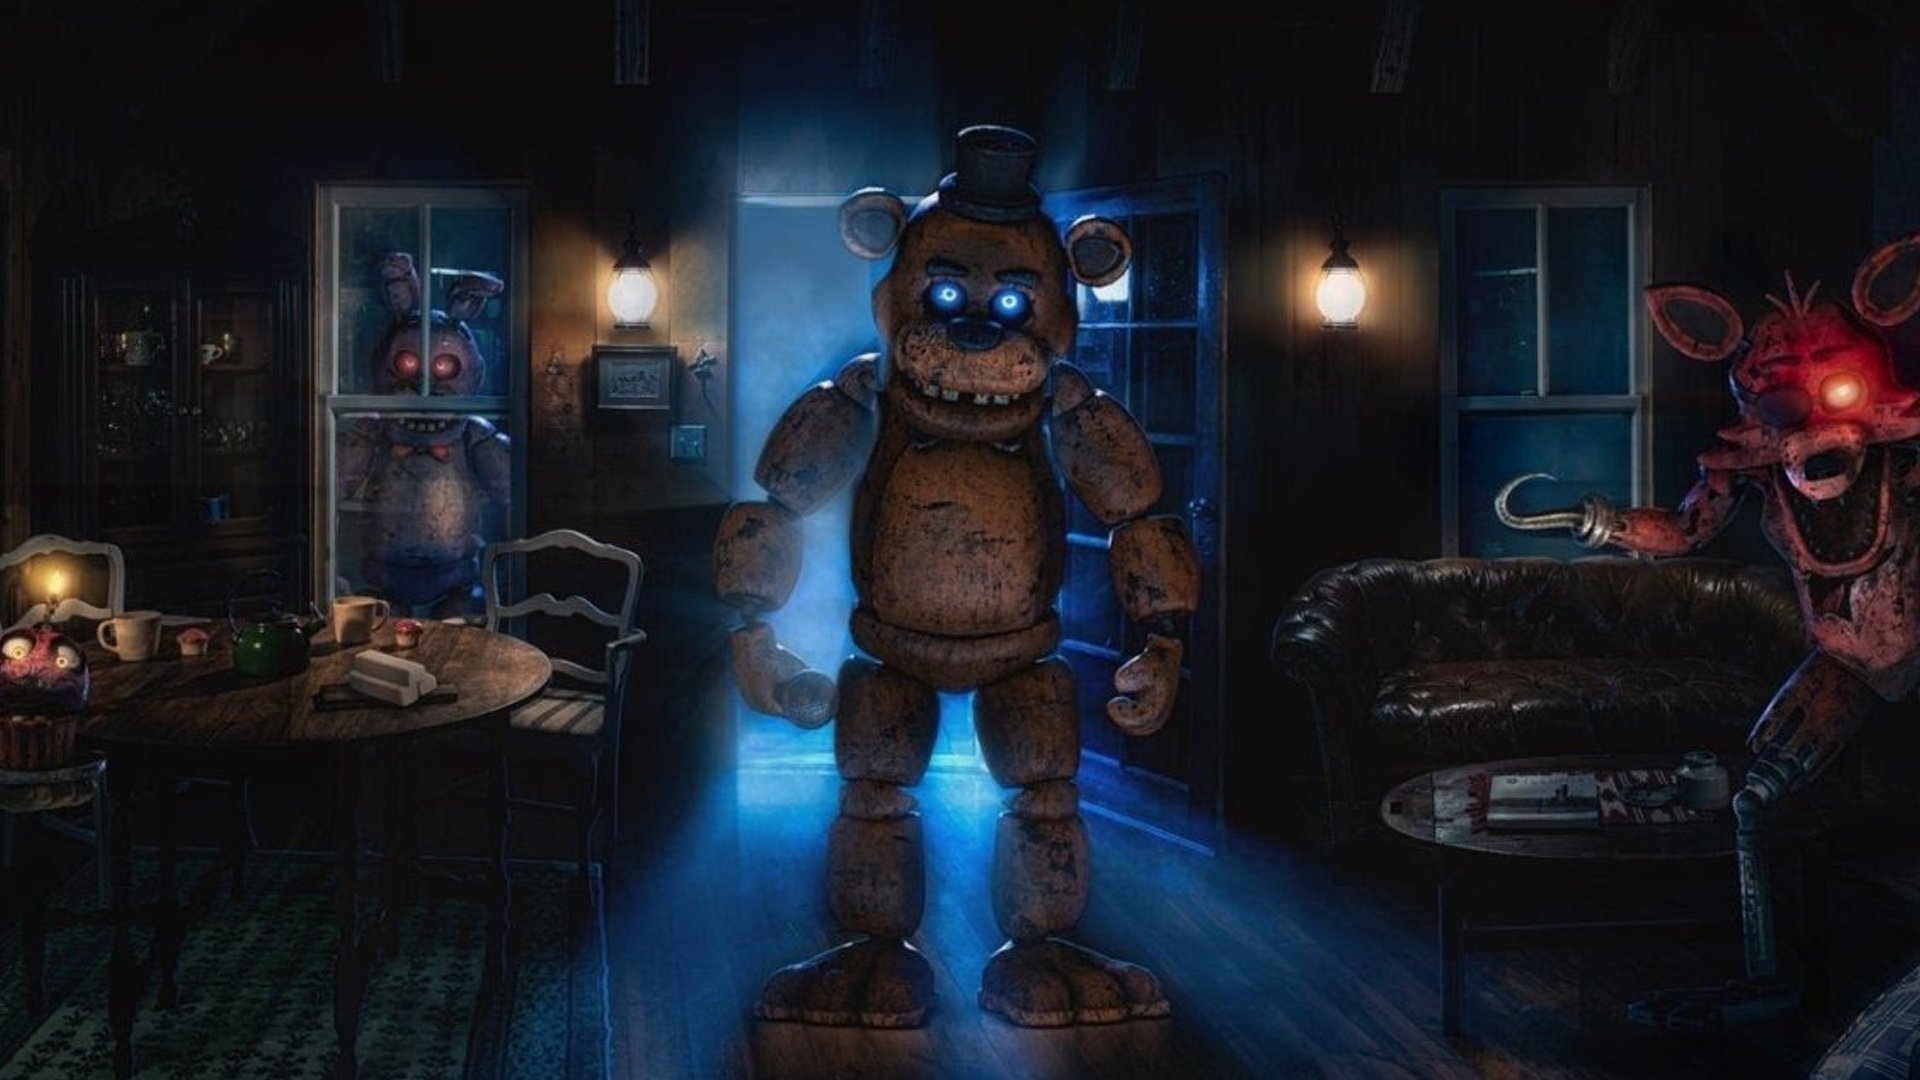 How Five Nights at Freddy's Adapts a Beloved Horror Video Game